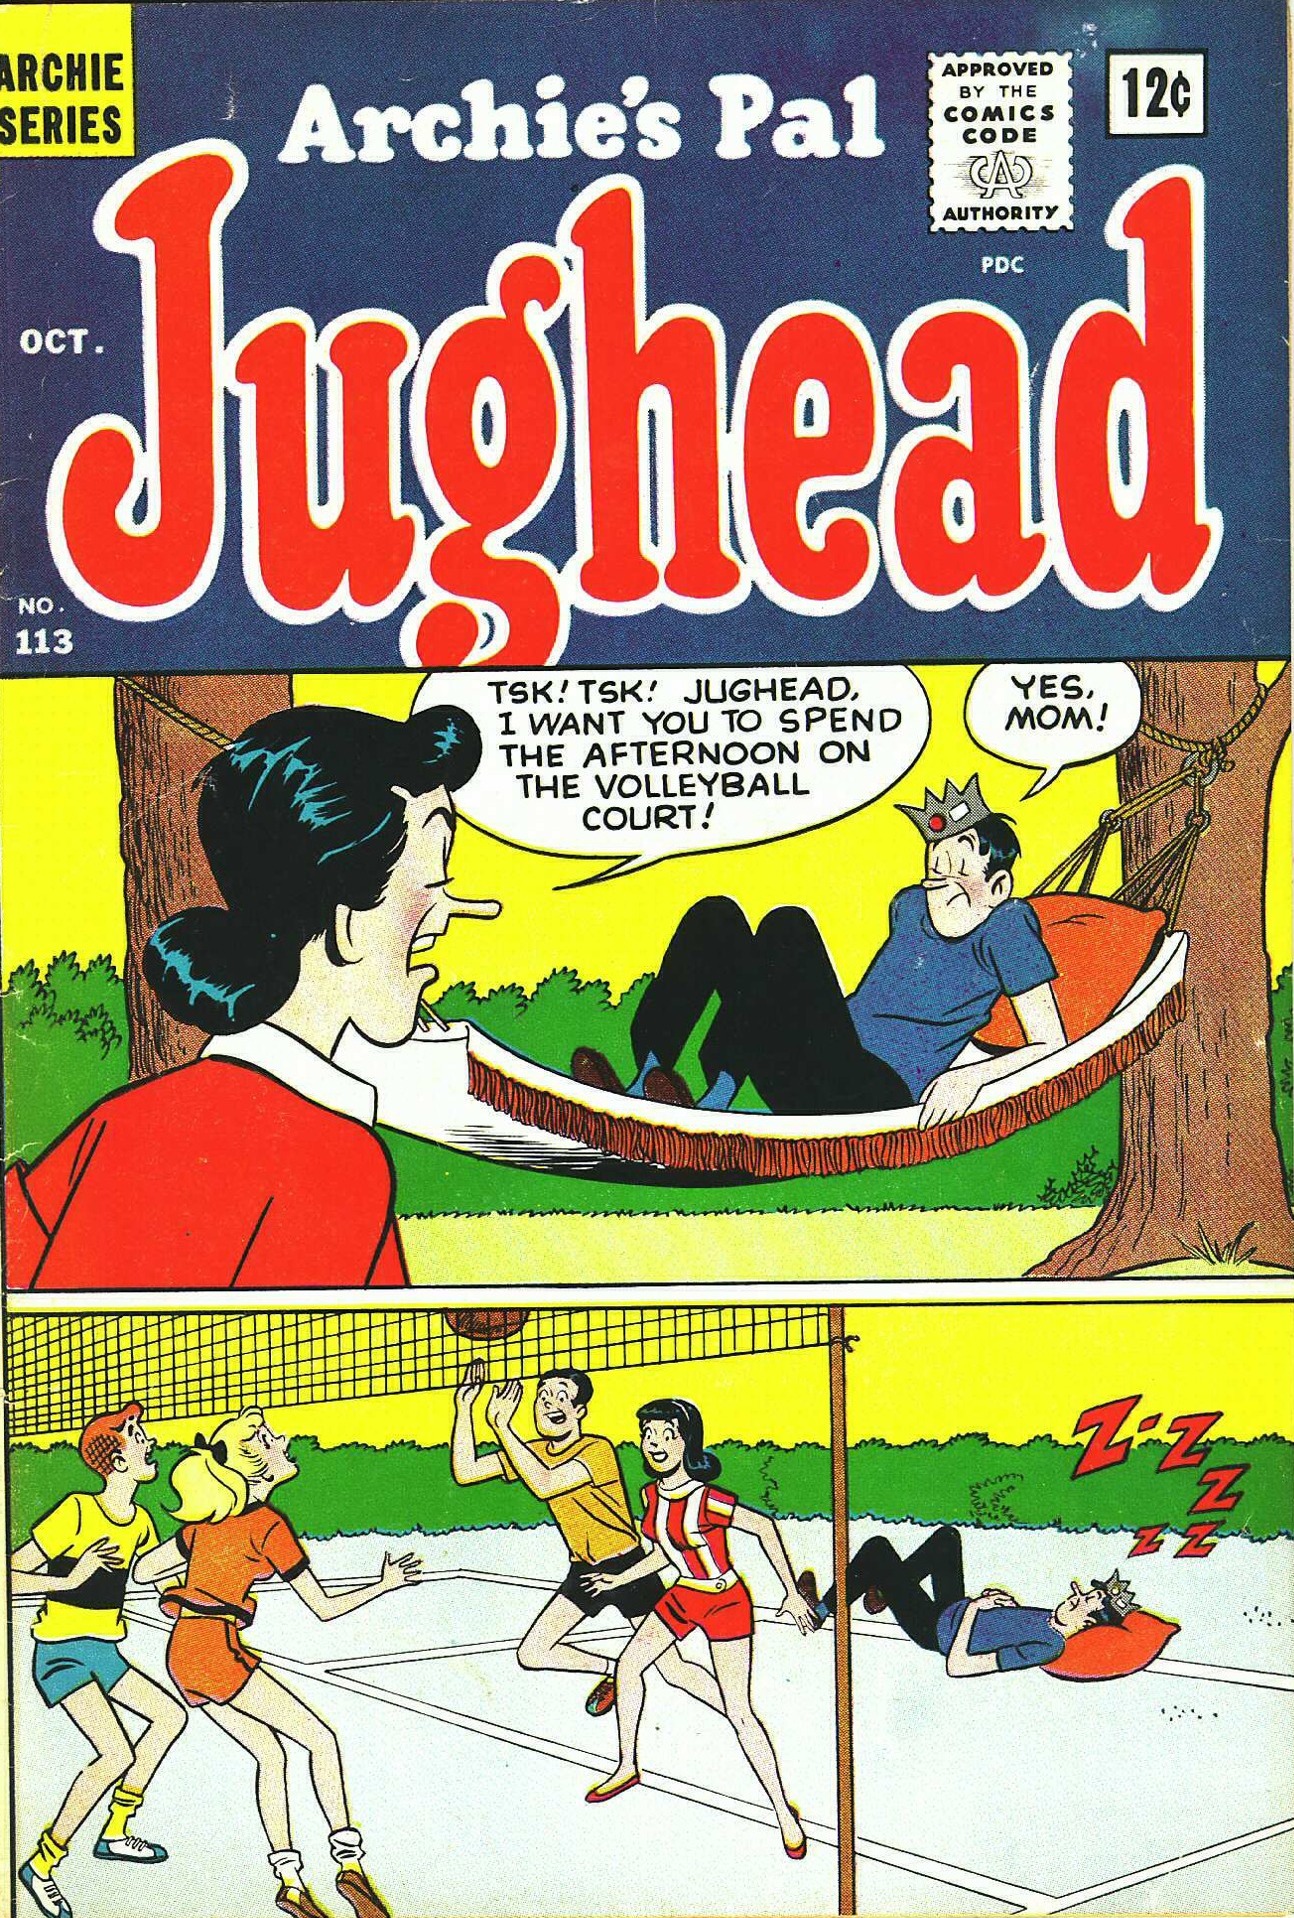 Read online Archie's Pal Jughead comic -  Issue #113 - 1